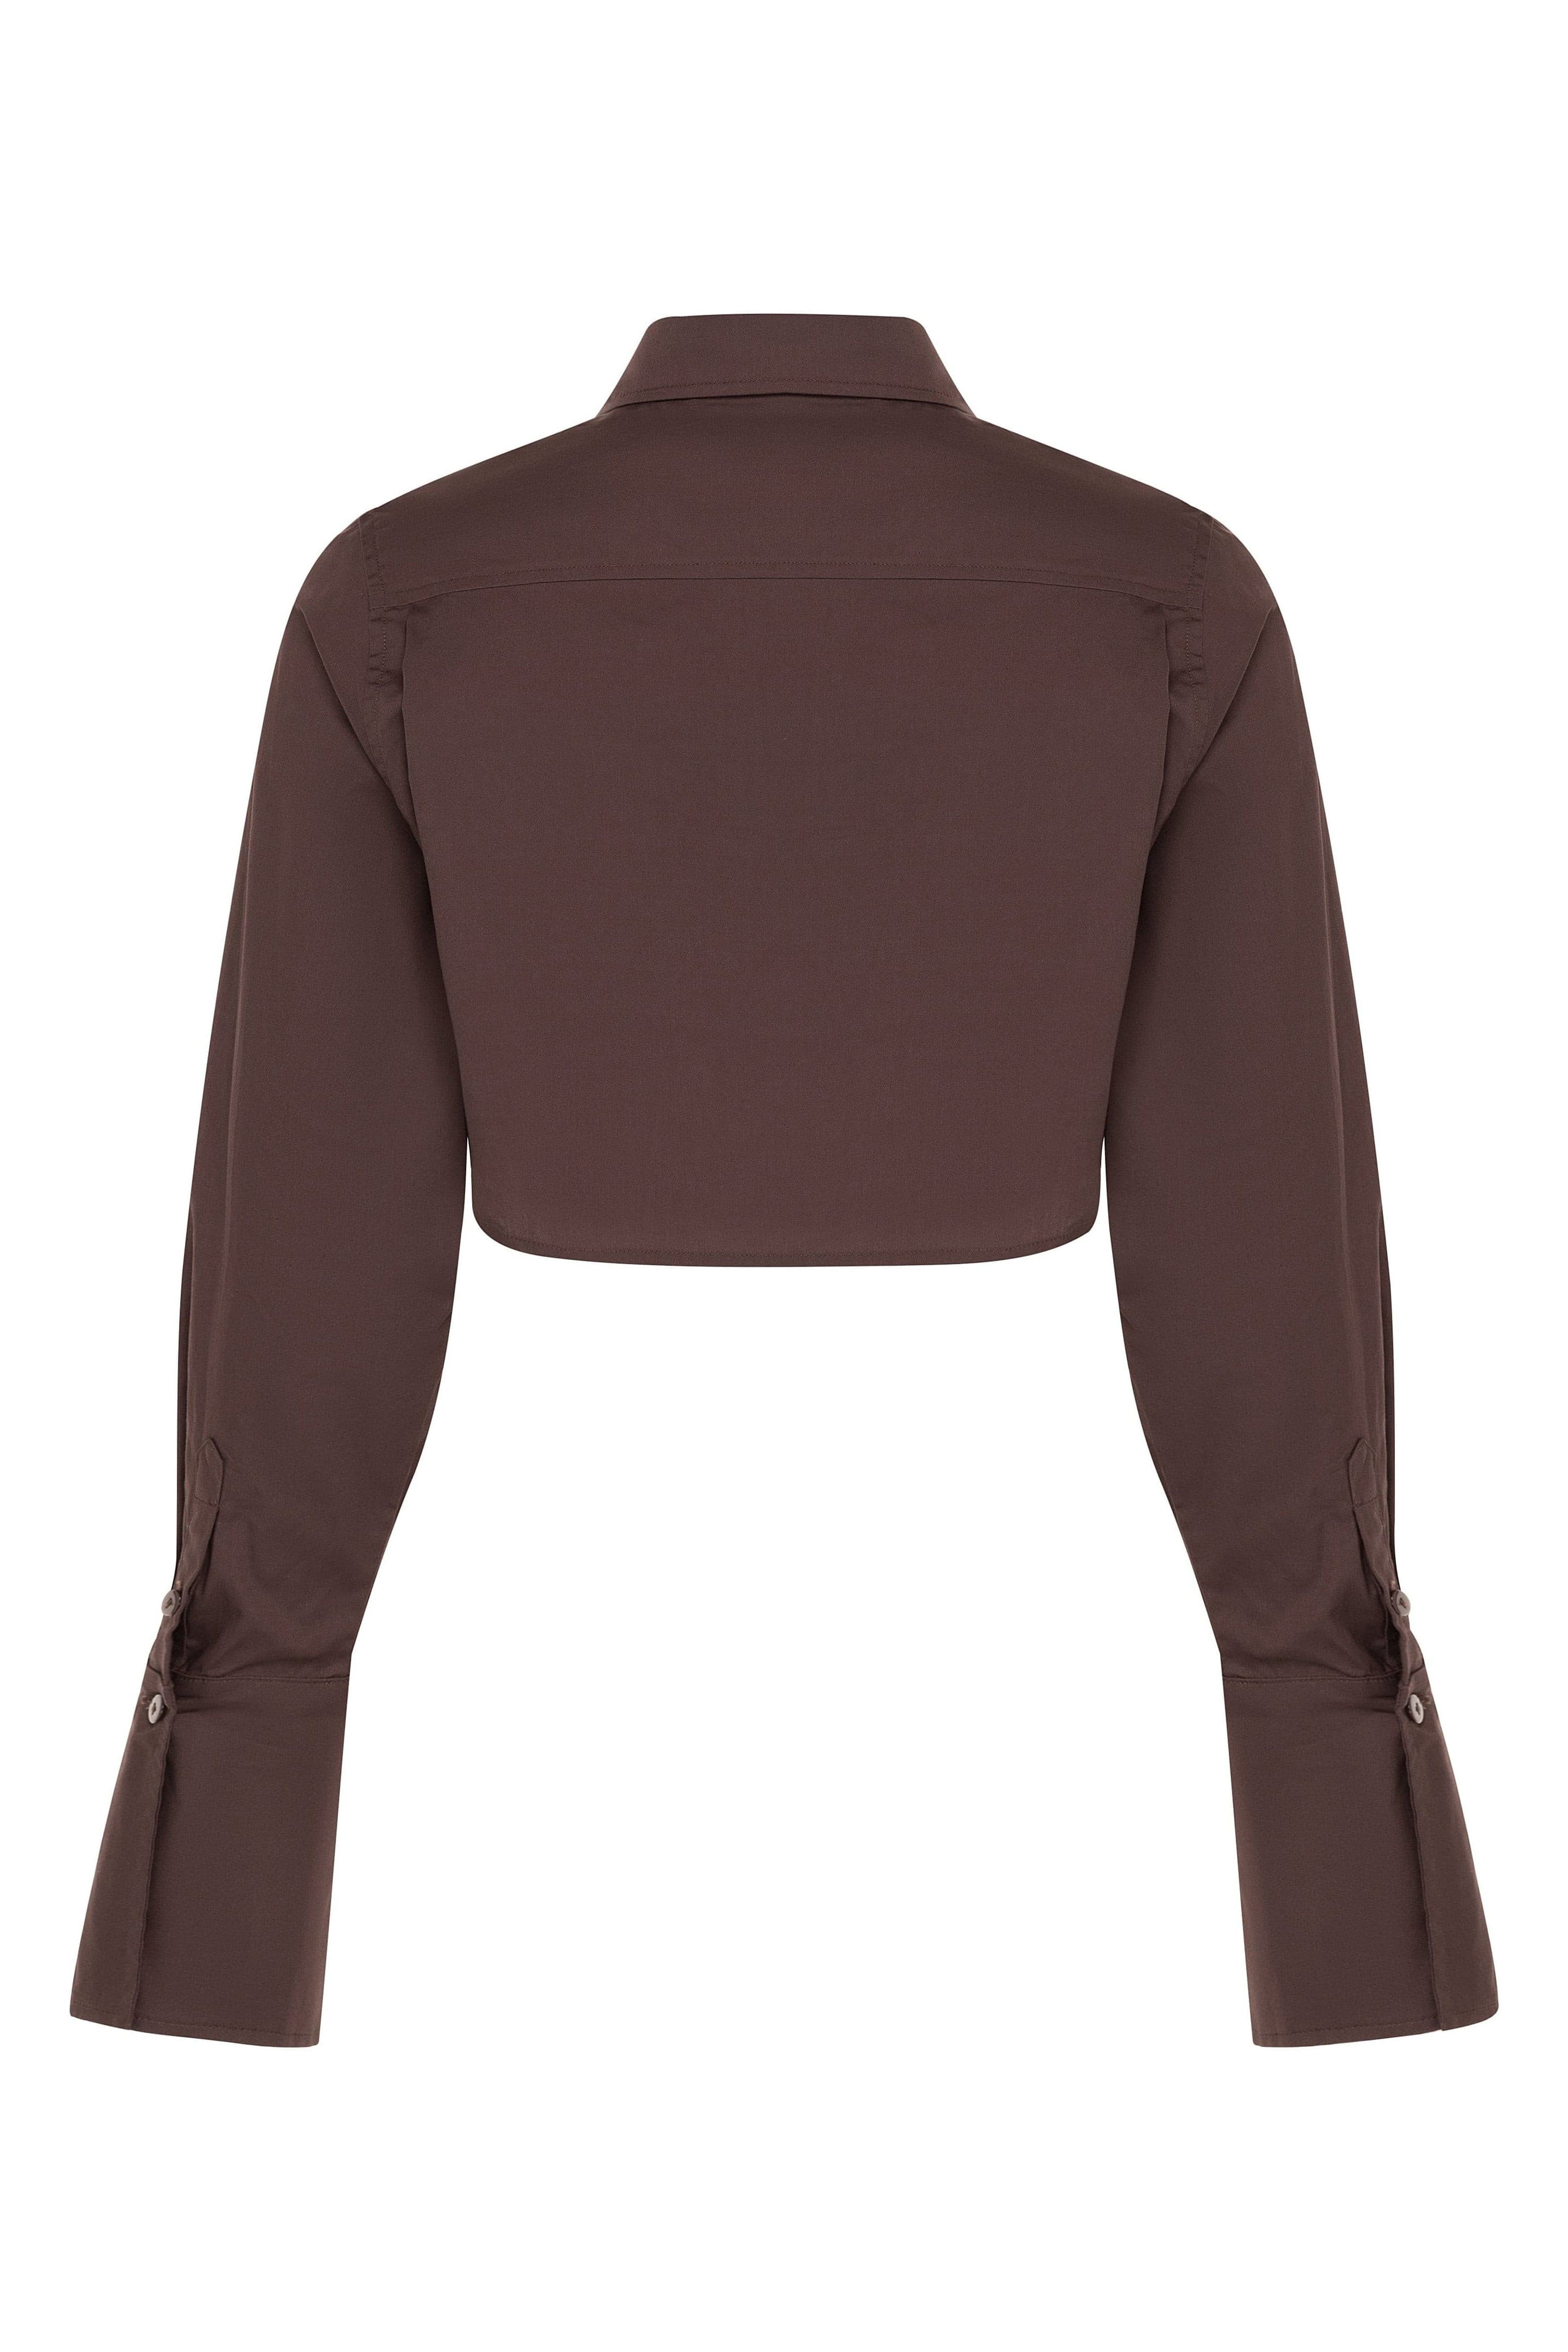 Coval Cropped Button Up Top - Brown.